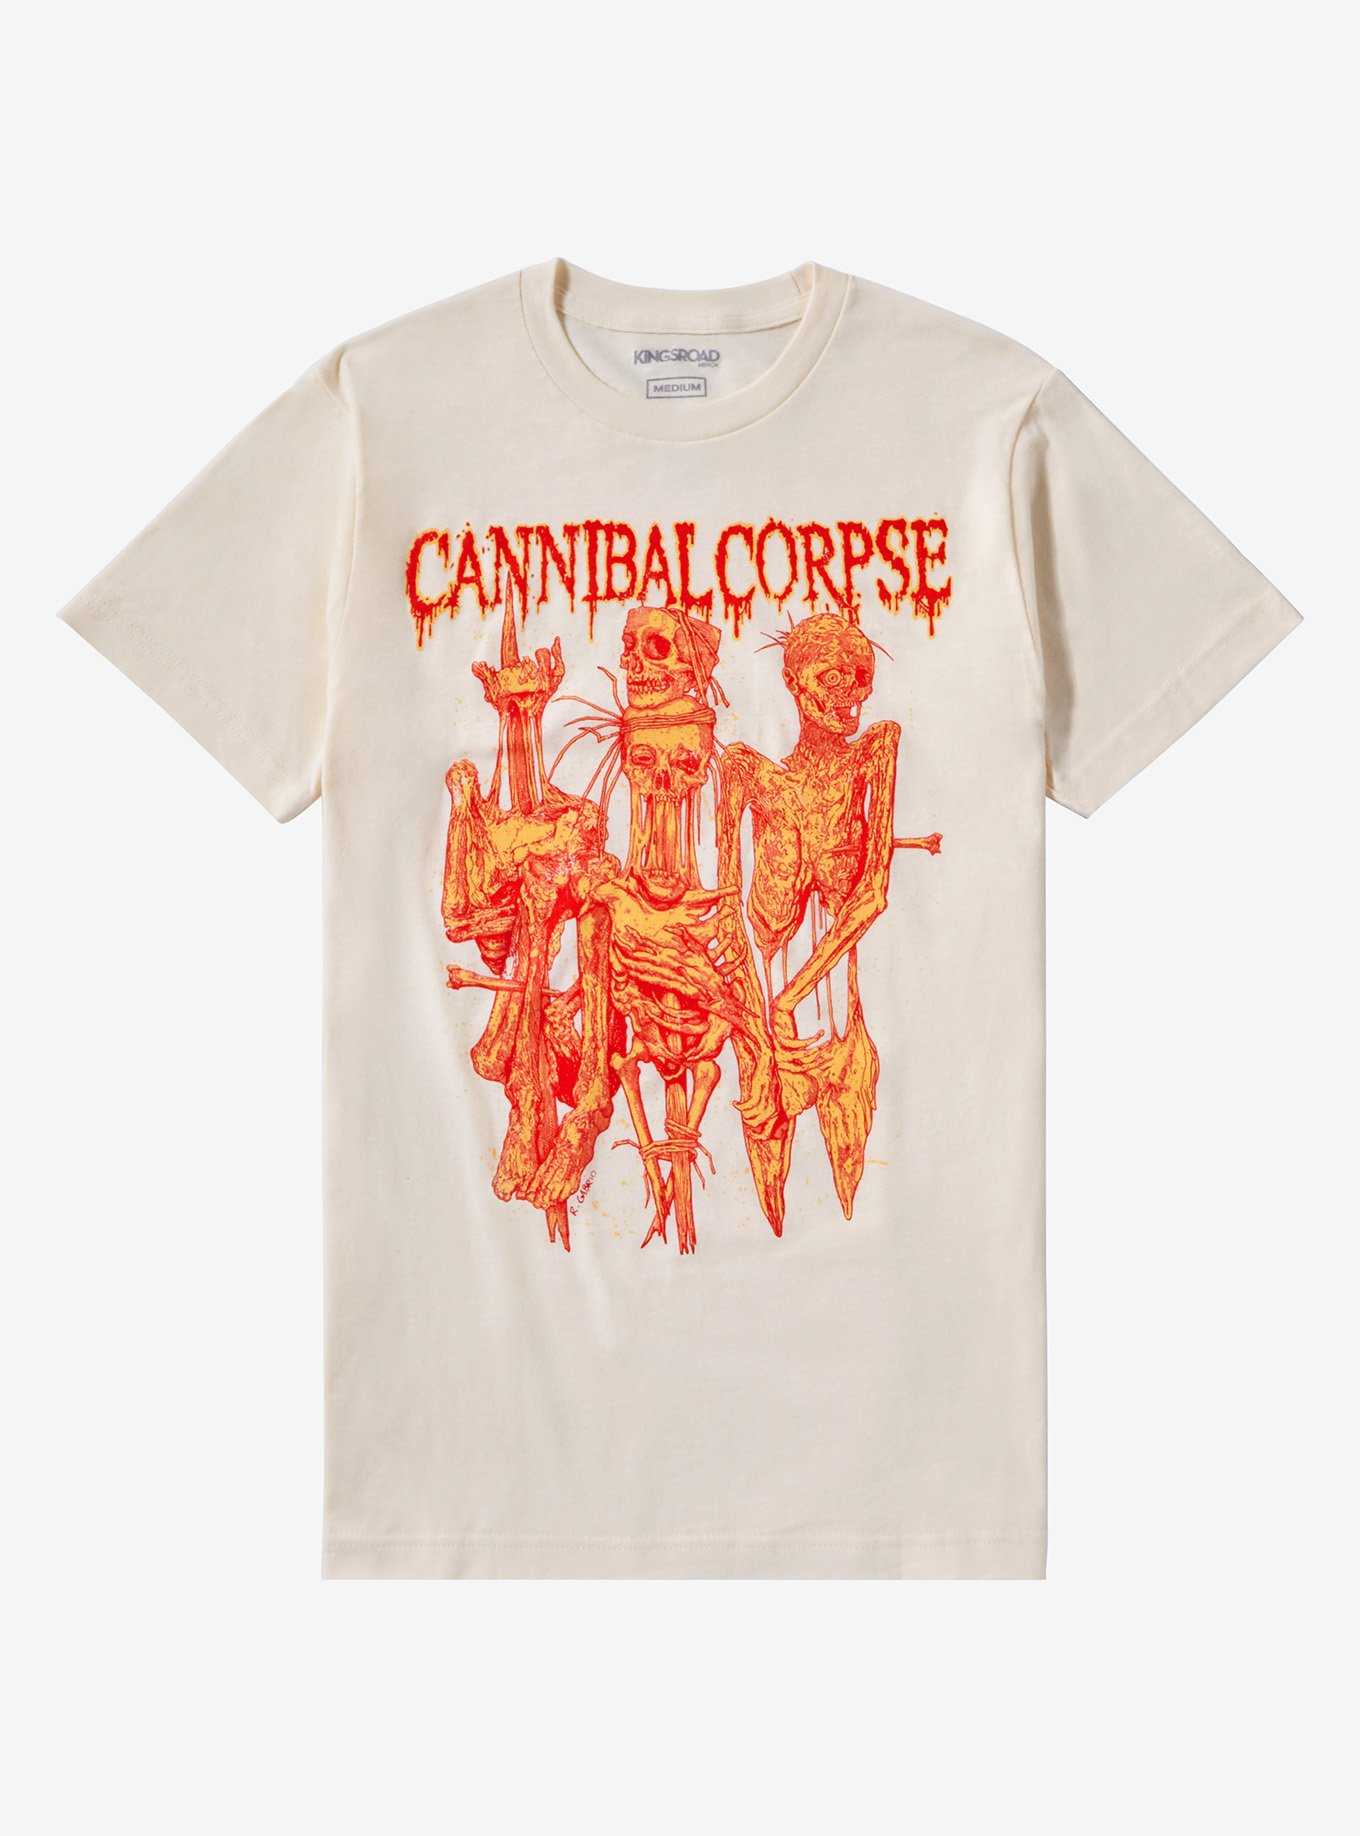 Cannibal Corpse Melting Corpses Boyfriend Fit Girls T-Shirt, , hi-res